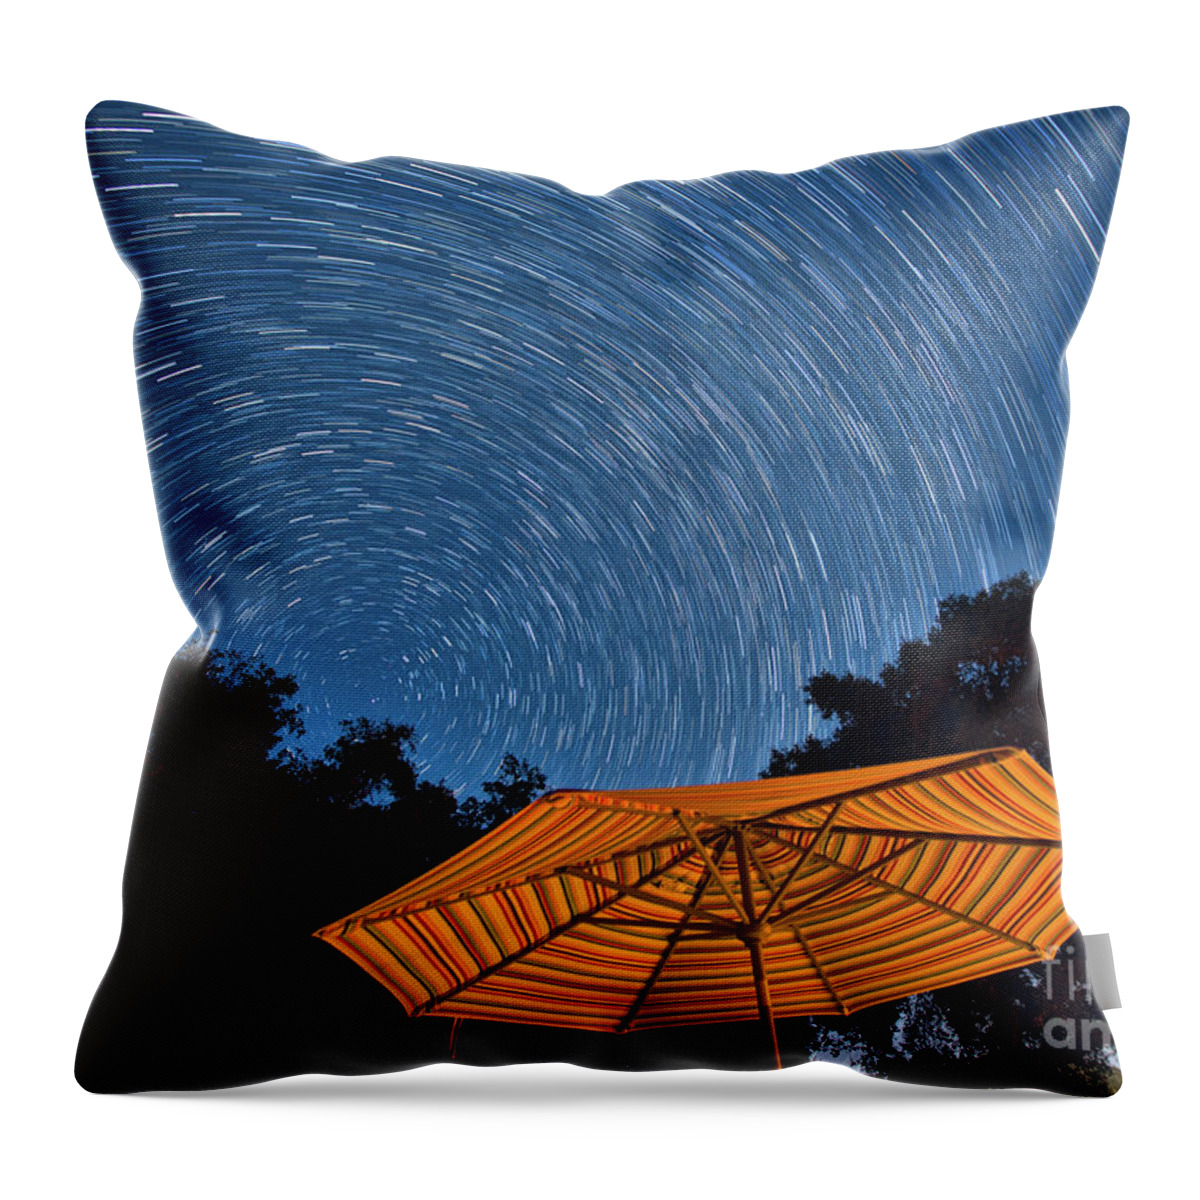 Star Trails Throw Pillow featuring the photograph Star Trails by Mimi Ditchie